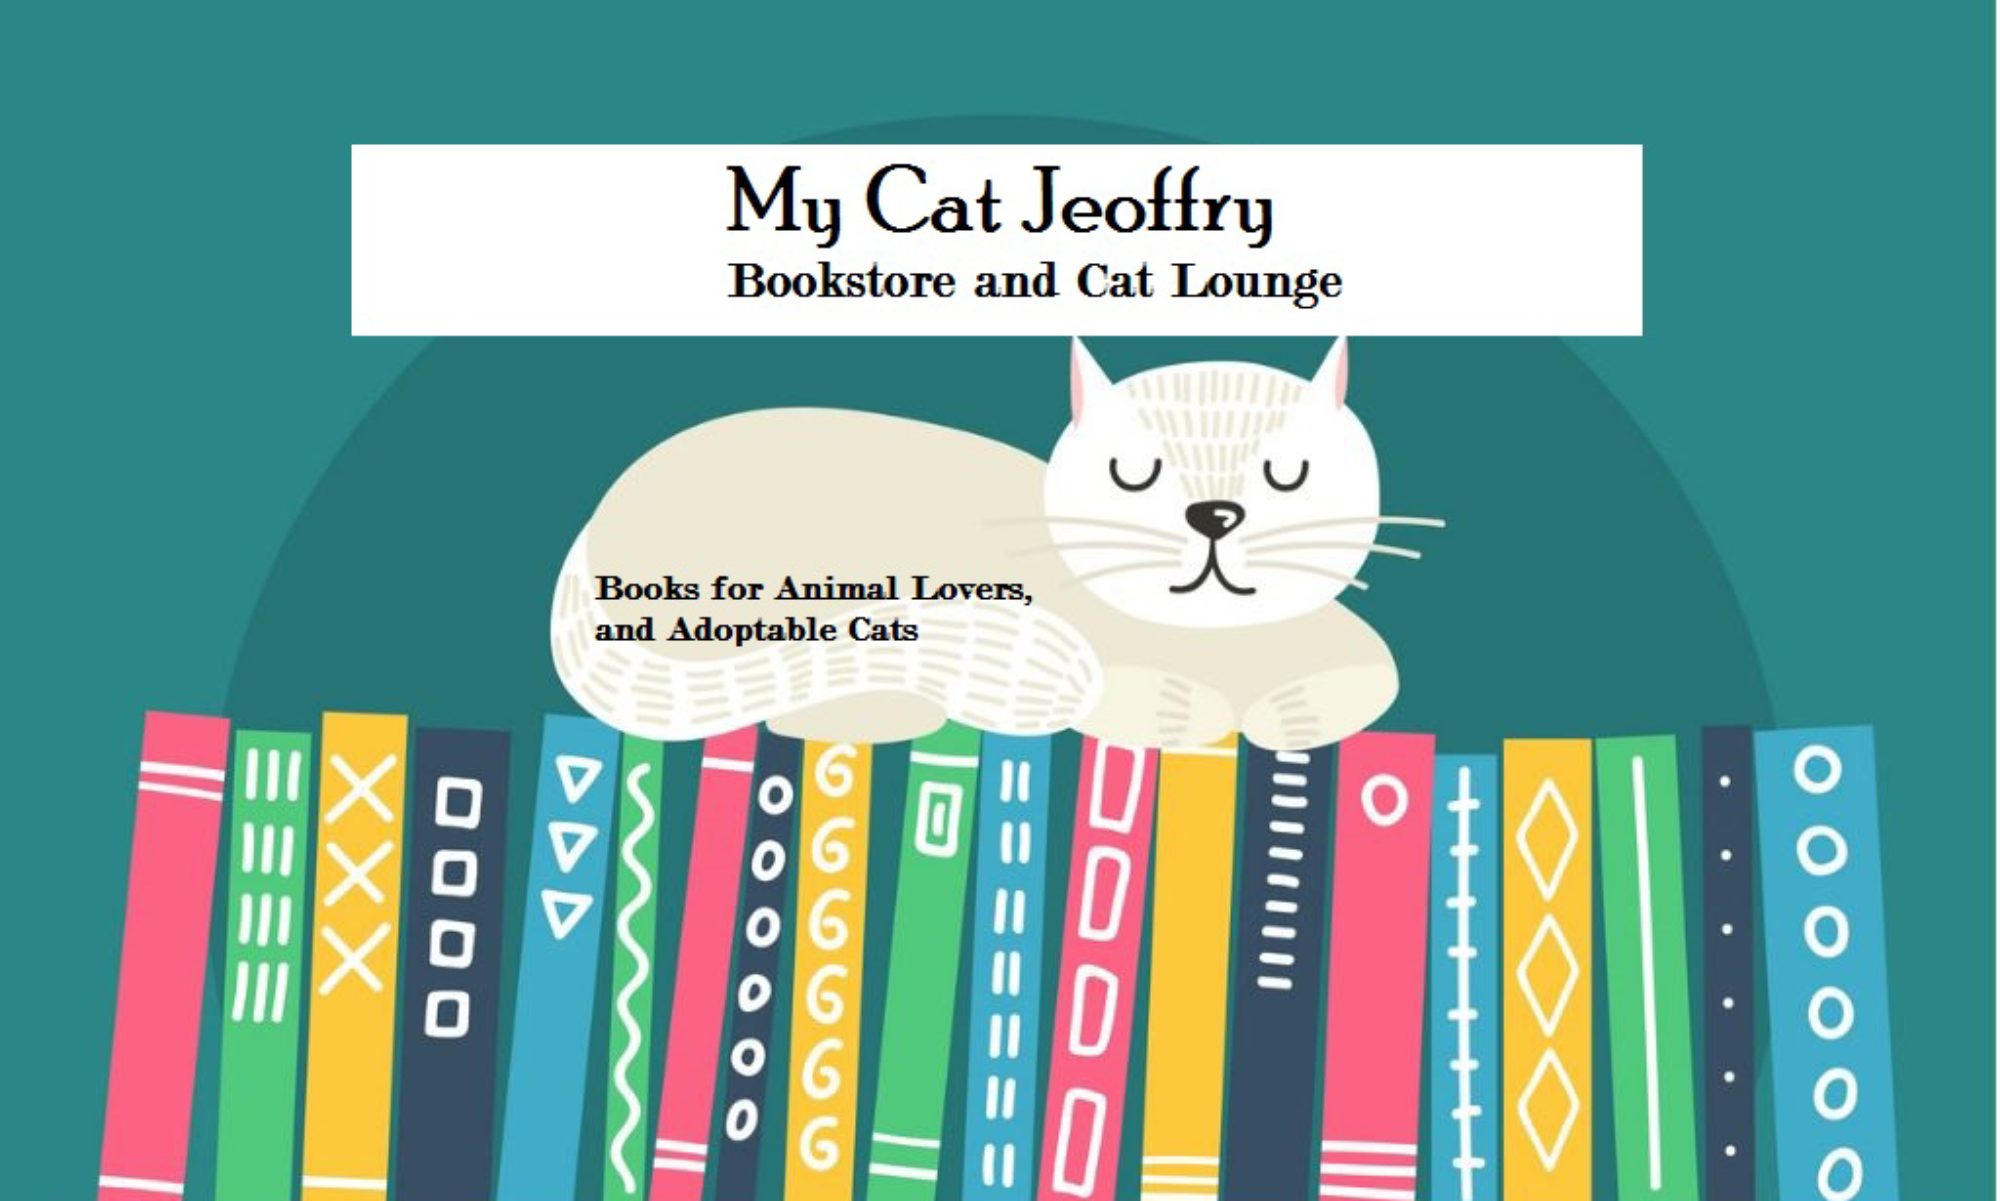 My Cat Jeoffry Bookstore and Cat Lounge